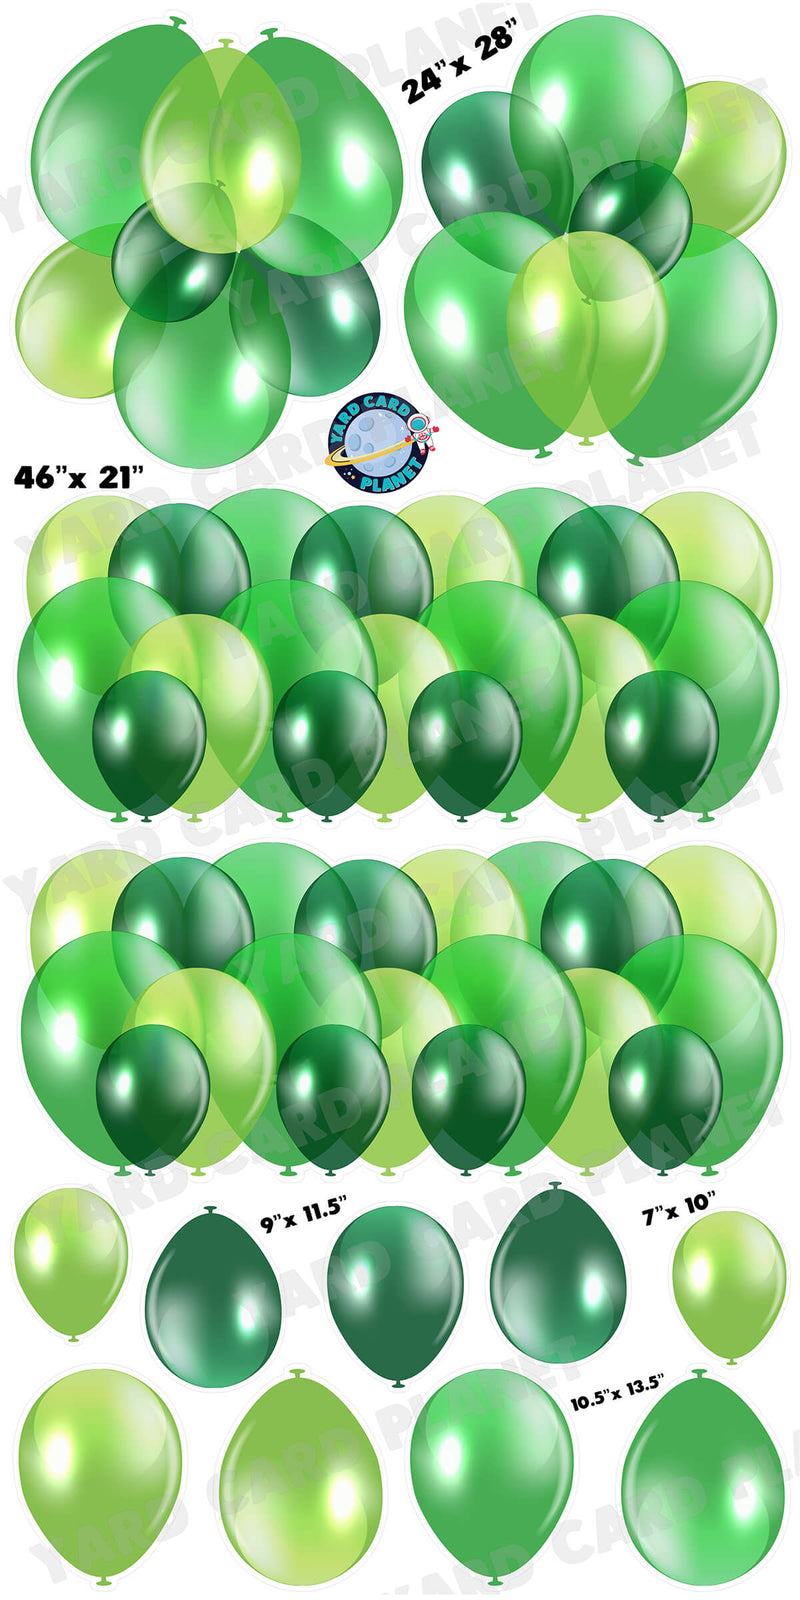 Green Balloon Panels, Bouquets and Singles Yard Card Set